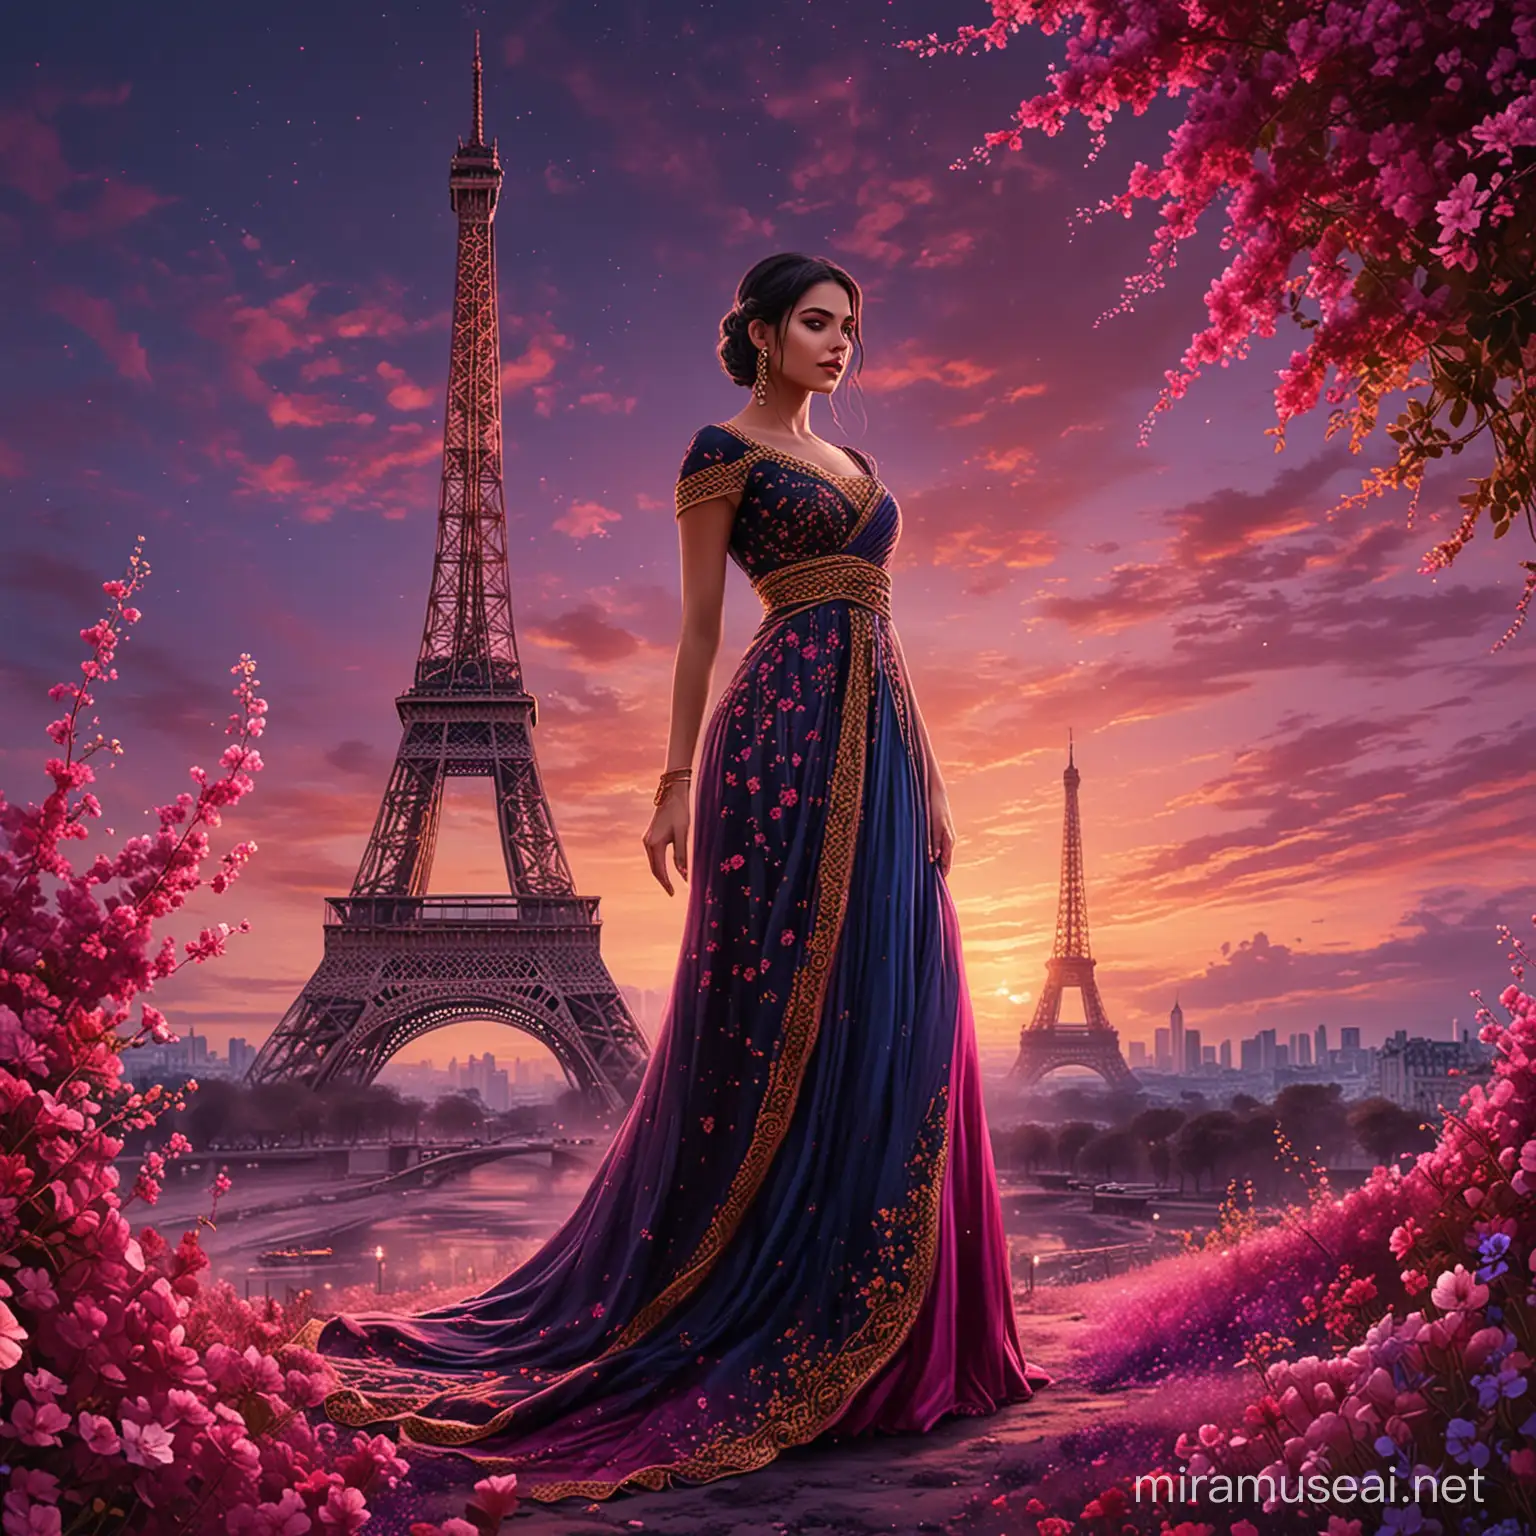 A beautiful woman, standing up on dark purple dust, surrounded by dark pink flowers. Long black braid. Long elegant dark red and blue dress, haute couture, sari tissu. Background dark pink sky. Background yellow tower effel decorated with golden light. Digital art, illustration, digital illustration, digital painting